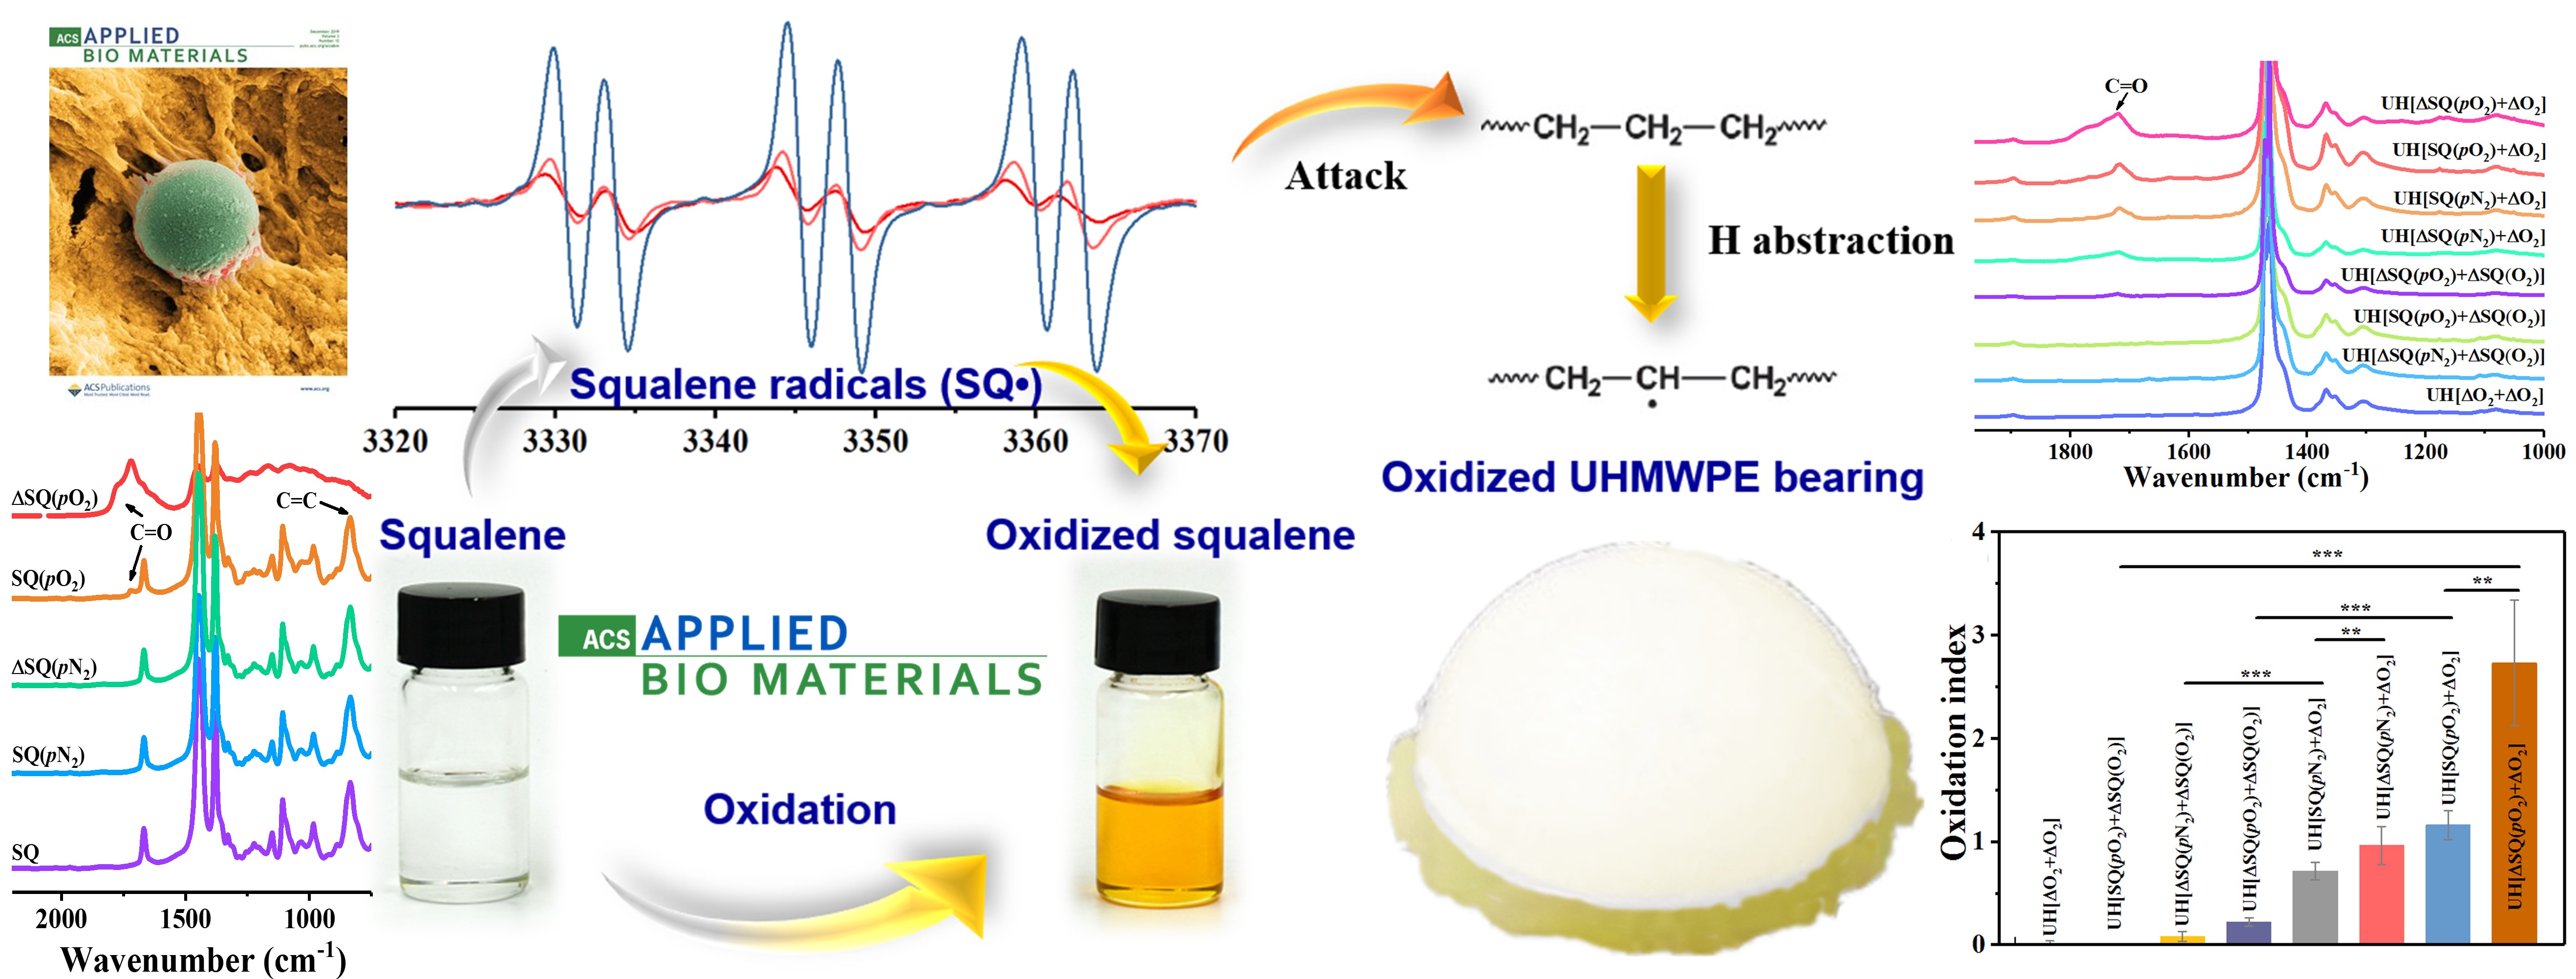  Insights into oxidation of the ultrahigh molecular weight polyethylene artificial joint related to lipid peroxidation. 